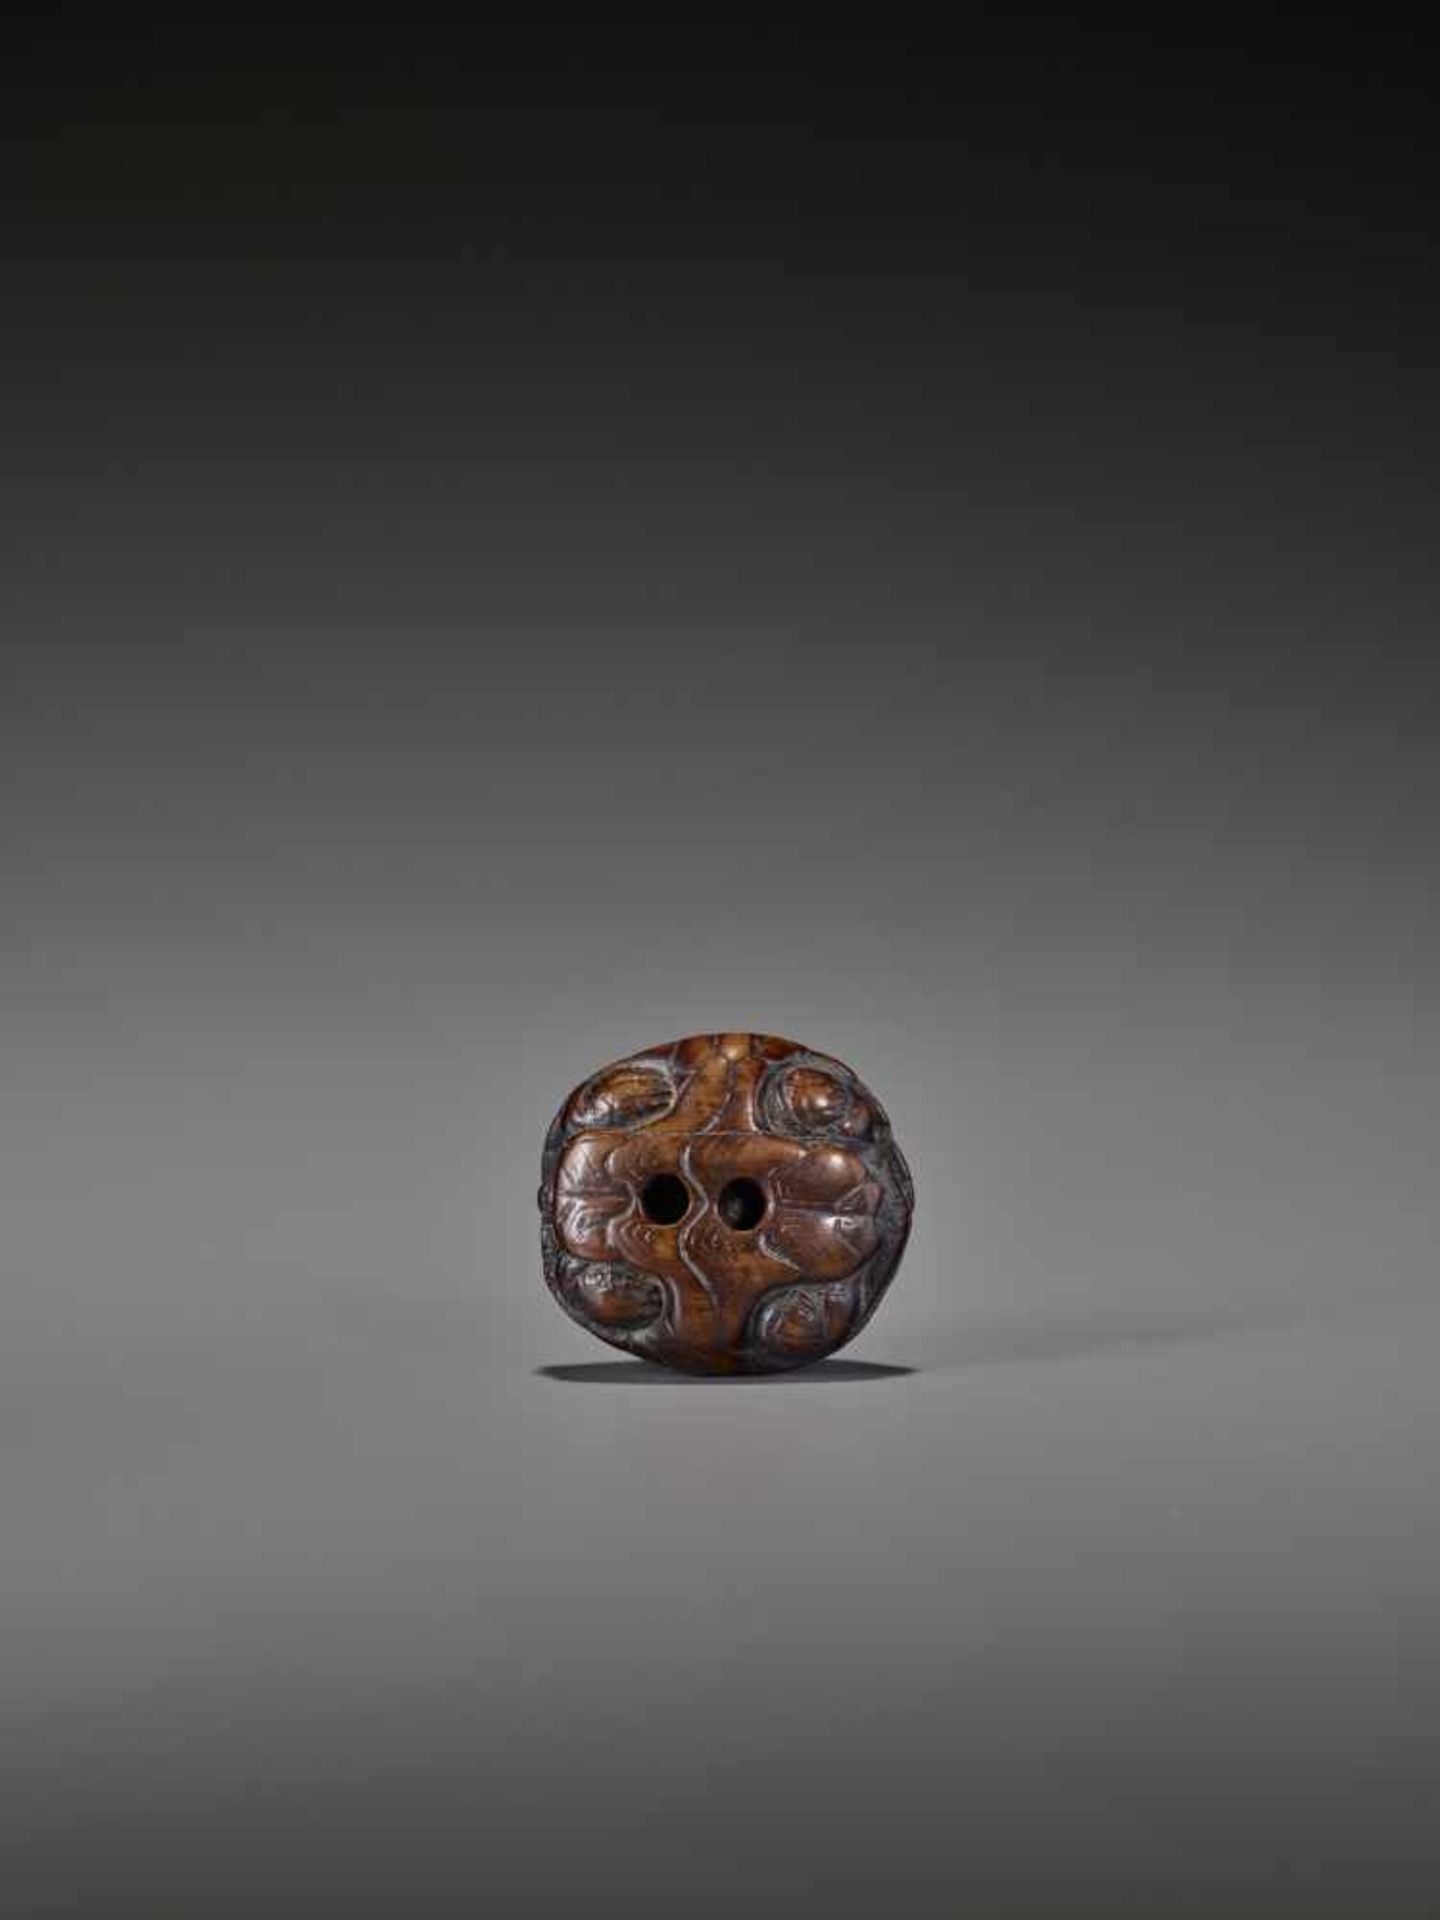 A WOOD NETSUKE OF A RETRACTED TORTOISE UnsignedJapan, 18th century, Edo period (1615-1868)This early - Image 10 of 10